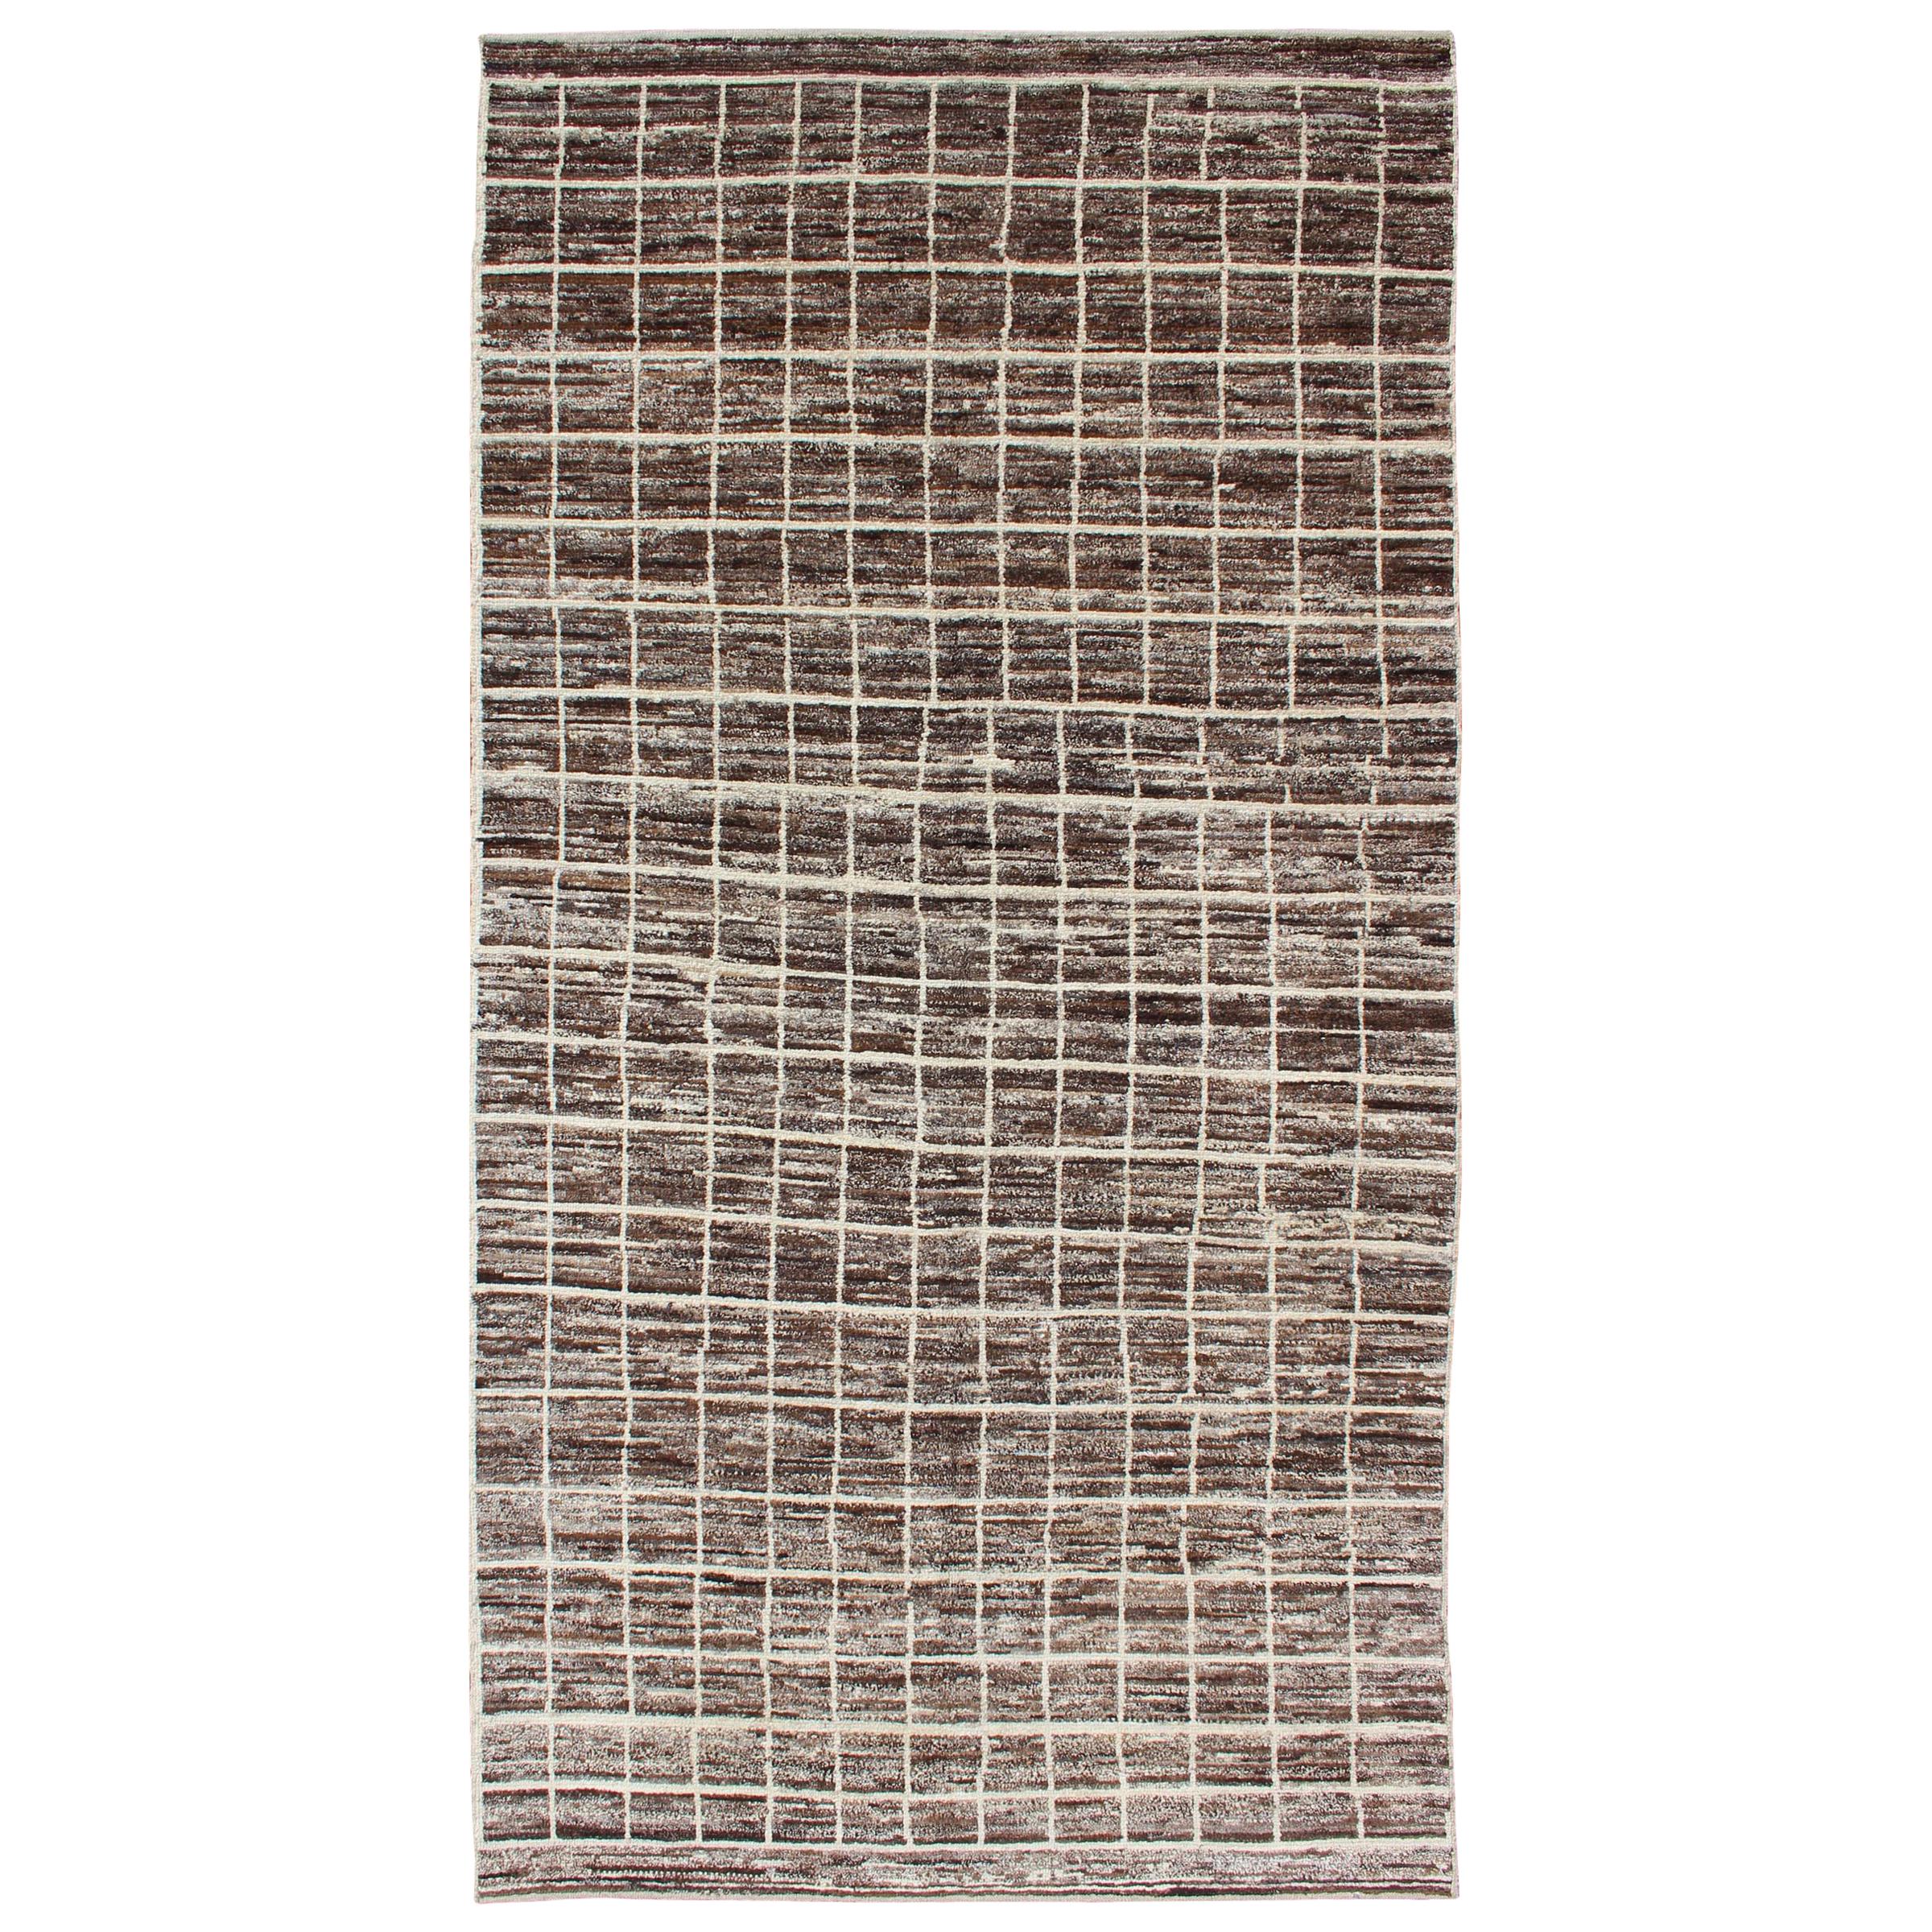 Keivan Woven Arts Modern Rug in Brown and Ivory  5' 3 x 10 '9 For Sale